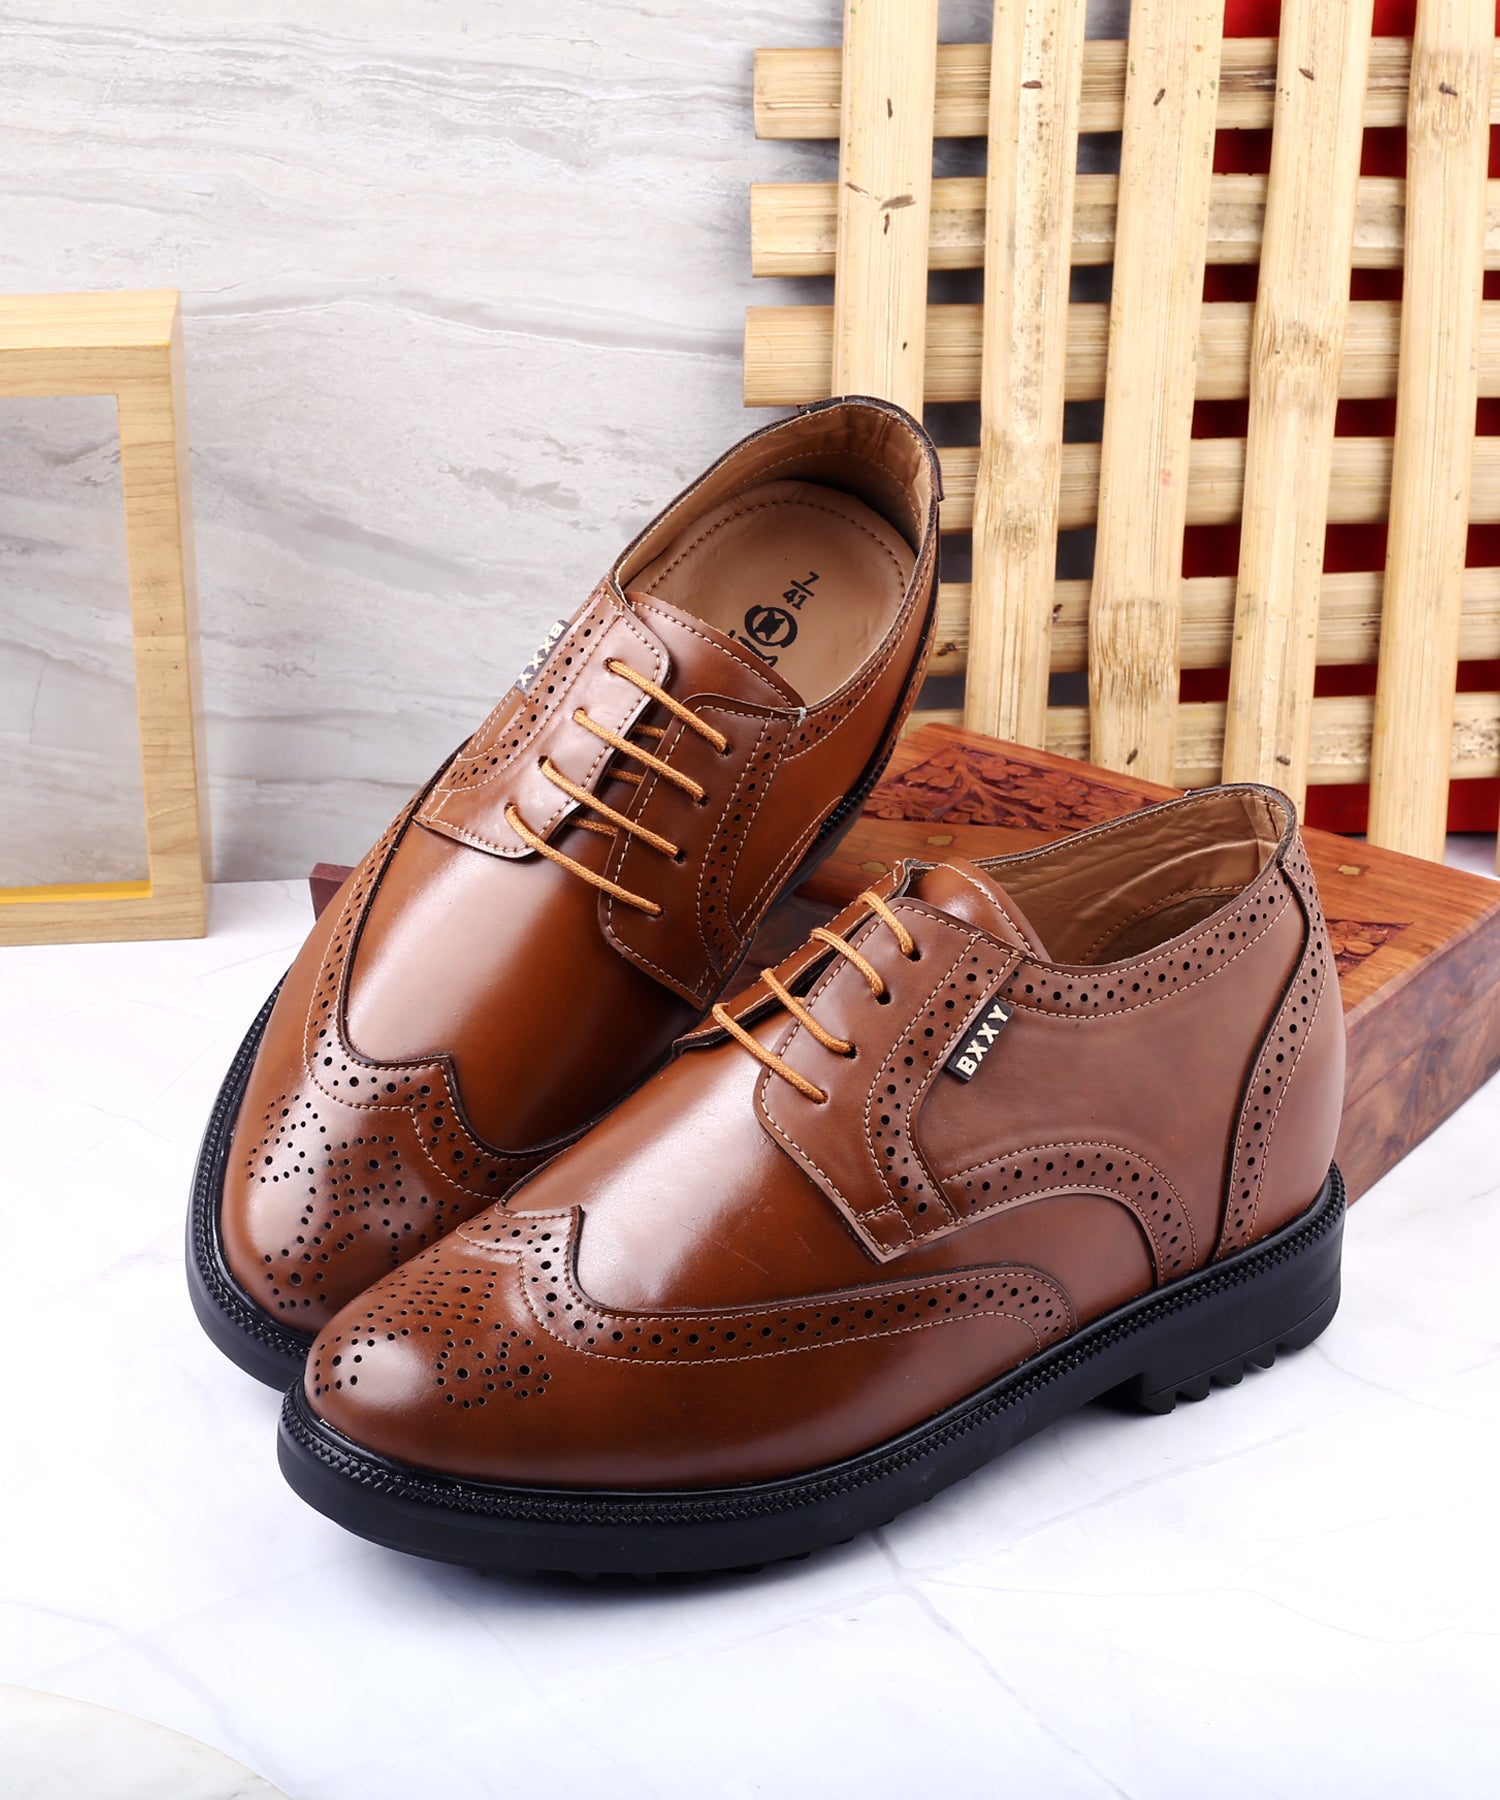 CALTO Height Increasing Elevator Shoes 3 Inches Taller - Leather Dress Shoes  - Men Invisible Elevated High Heels Oxfords, Brown, 6 : Buy Online at Best  Price in KSA - Souq is now Amazon.sa: Fashion